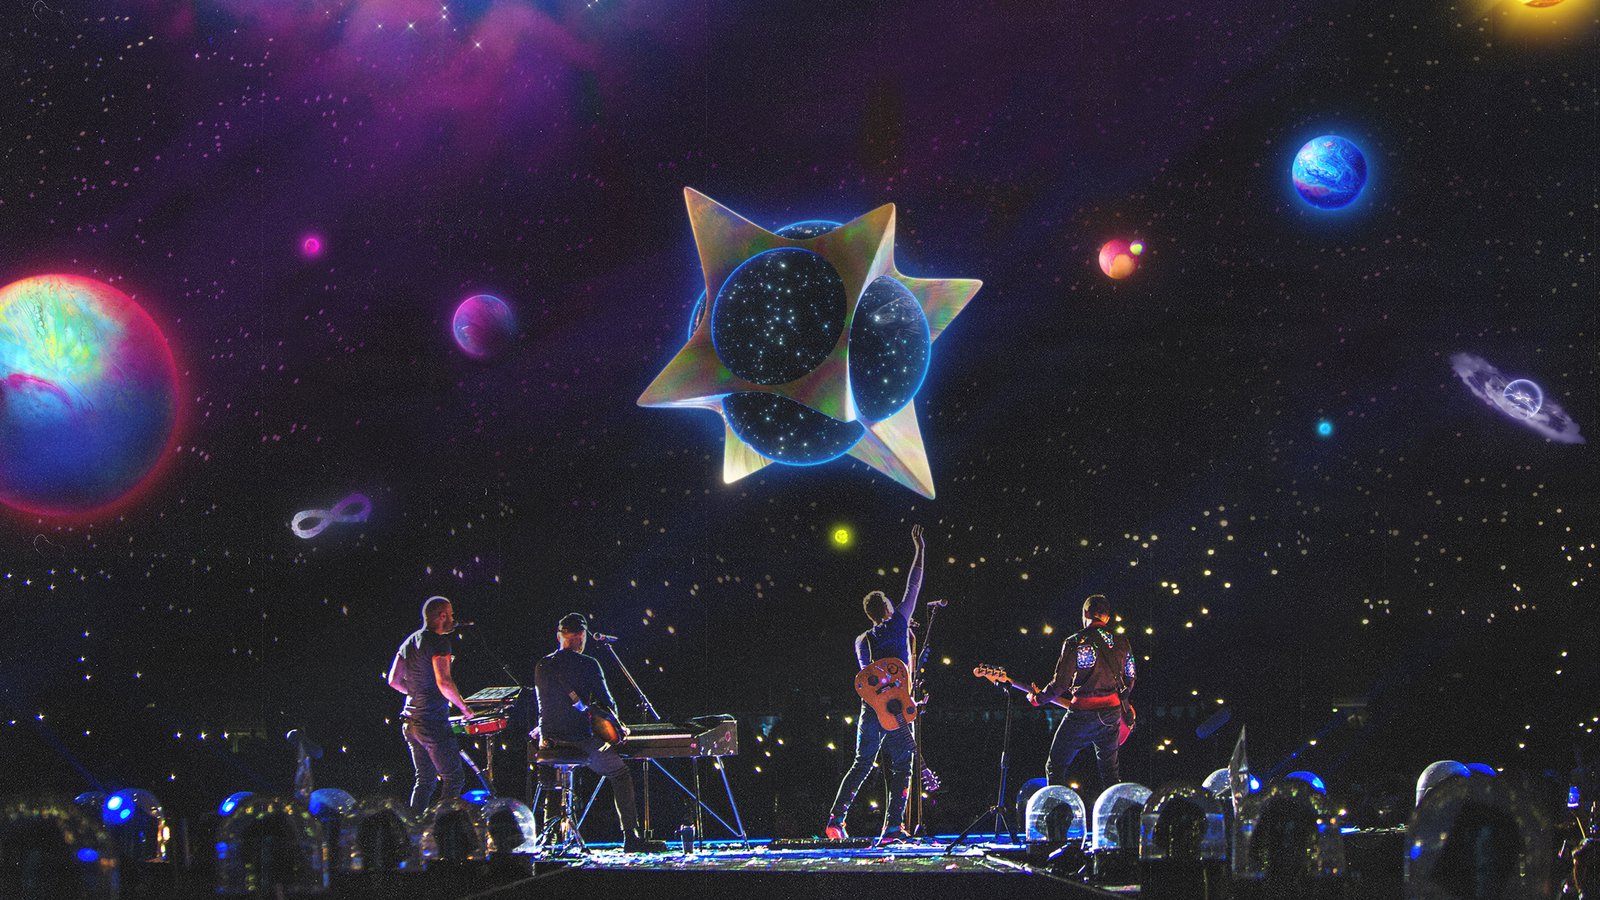 coldplay playing music